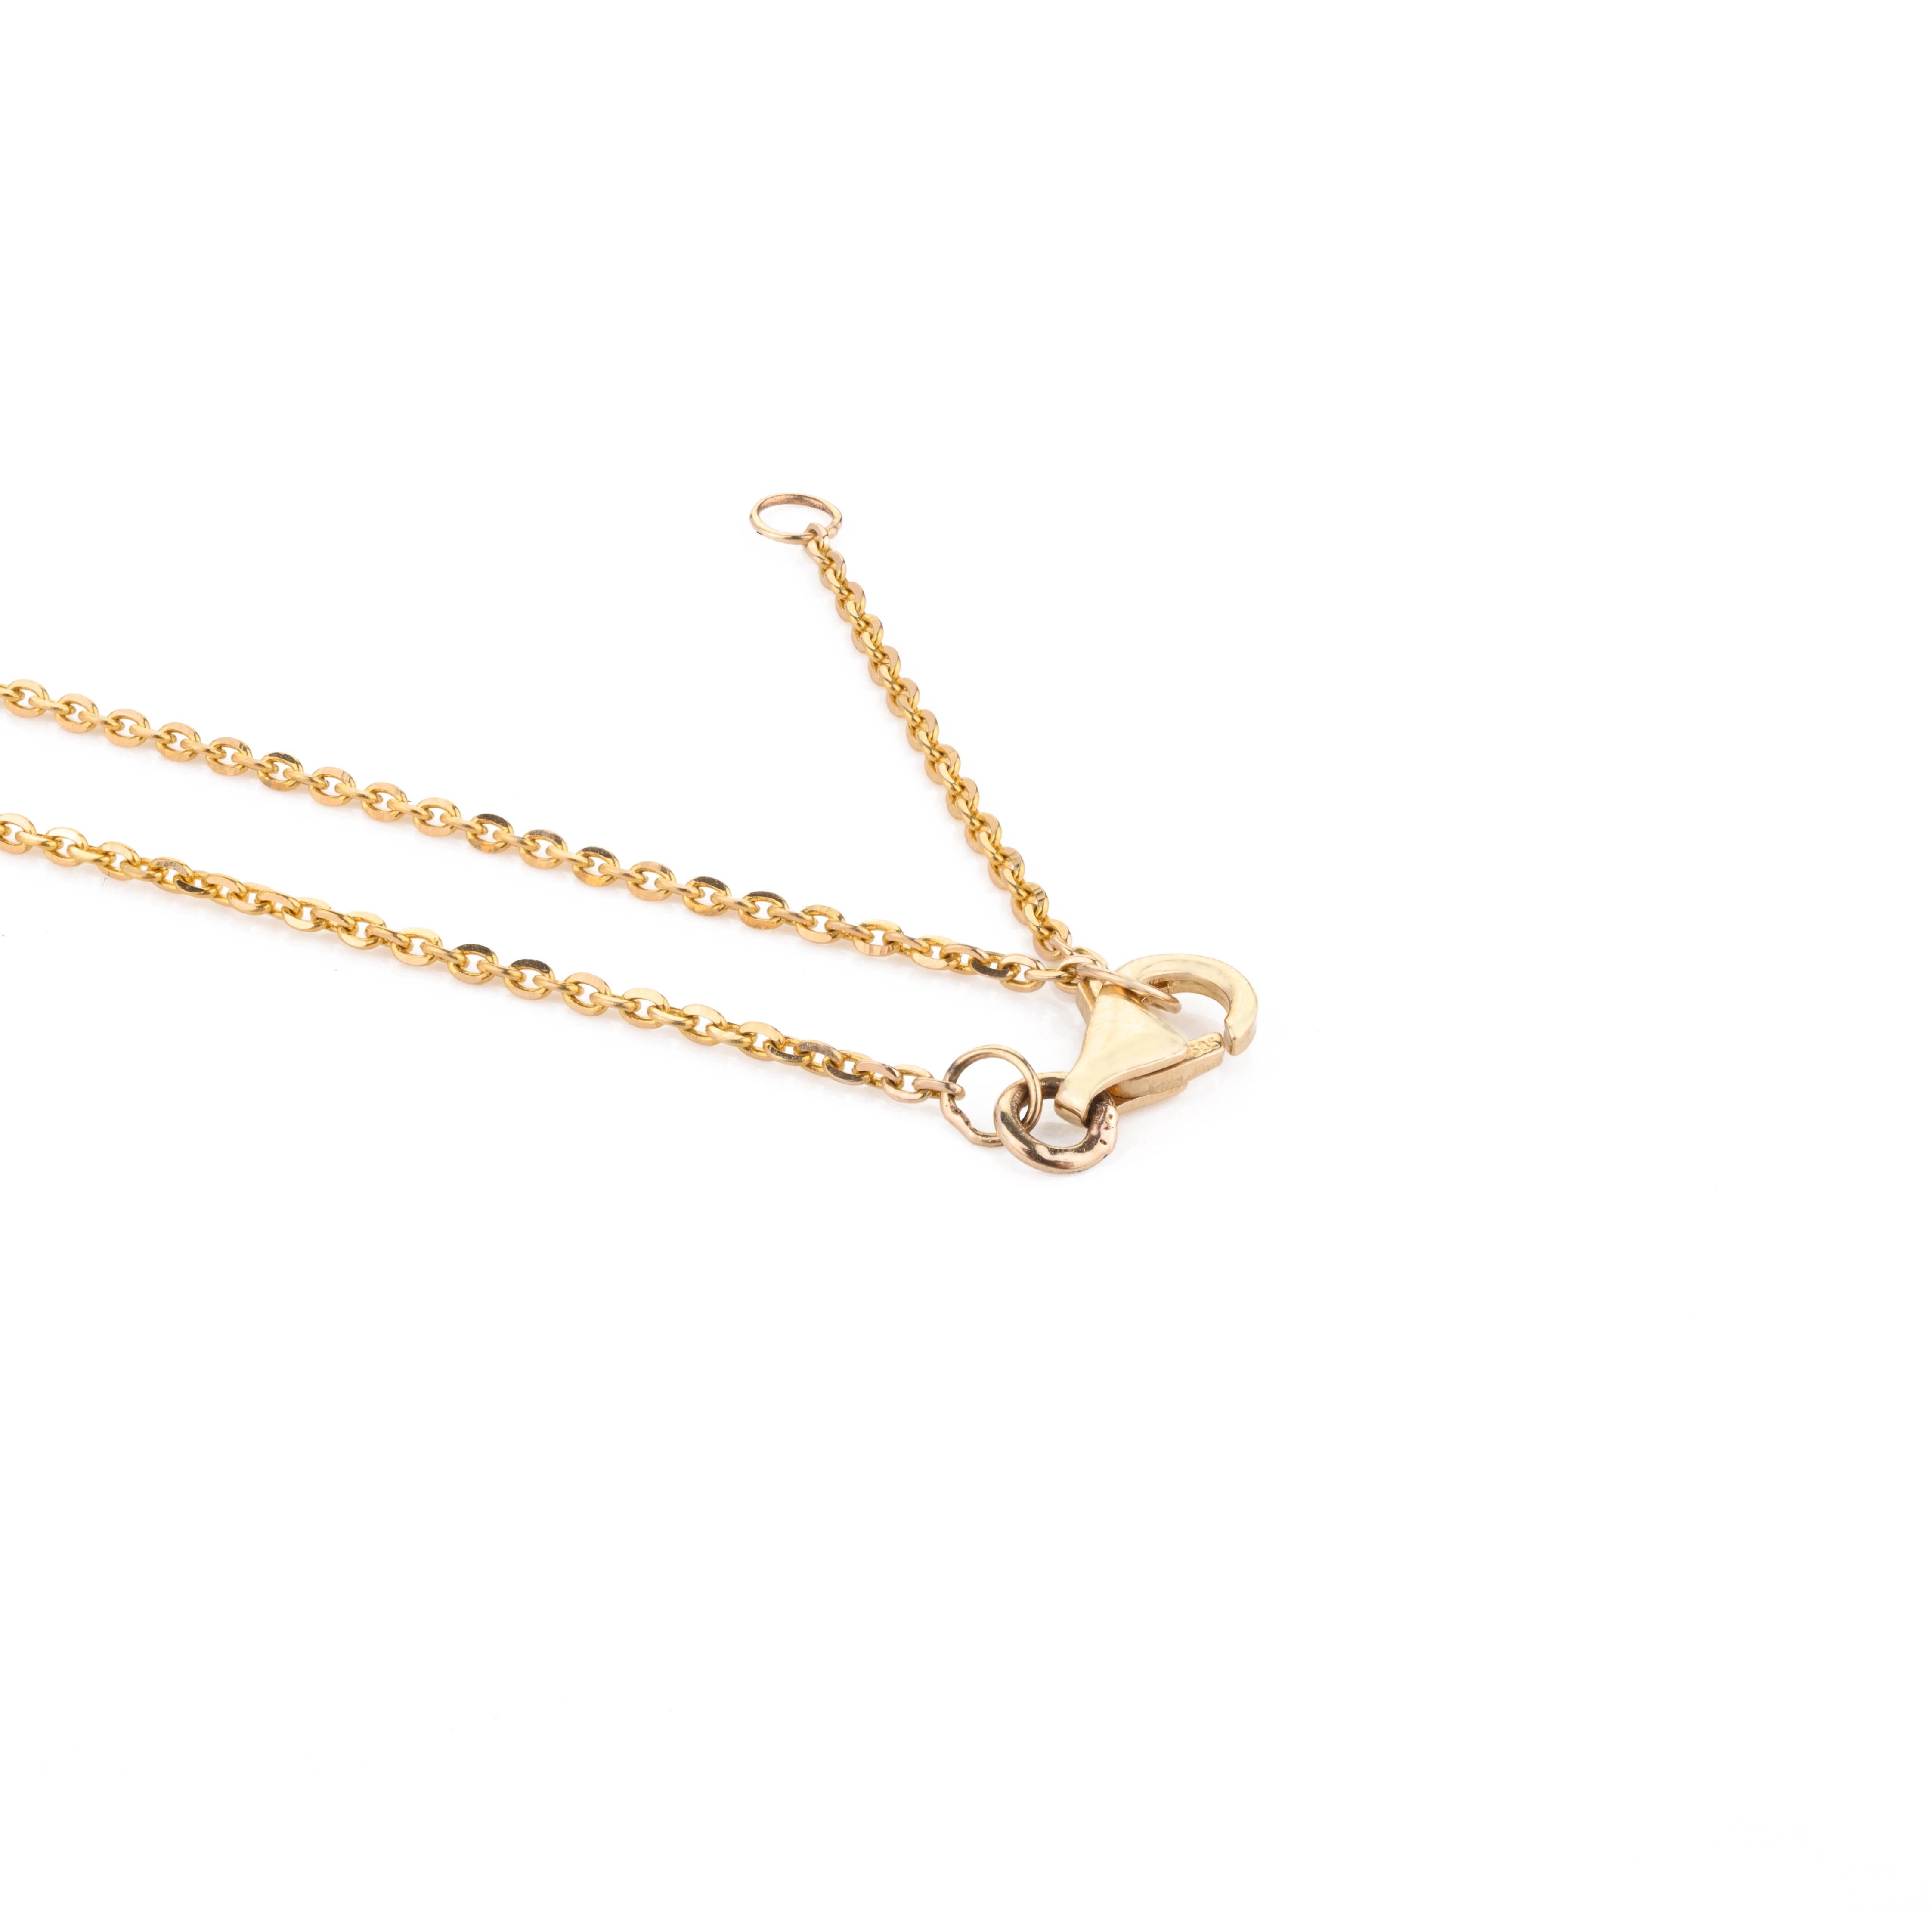 Diamond Clover Roller Pendant Chain Necklace for Her in 14k Solid Yellow Gold 1